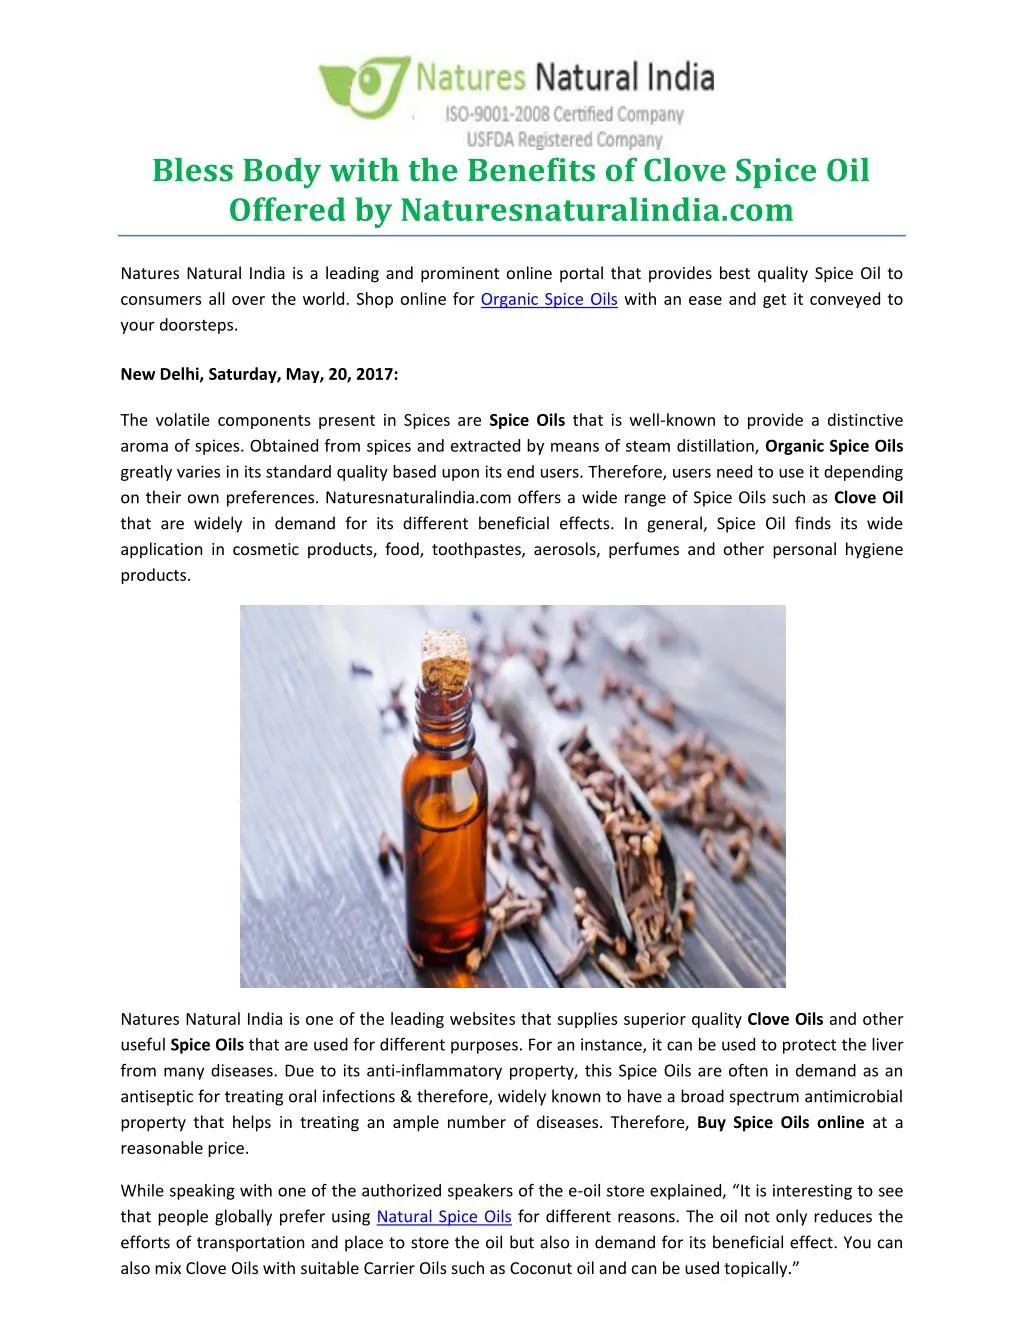 bless body with the benefits of clove spice